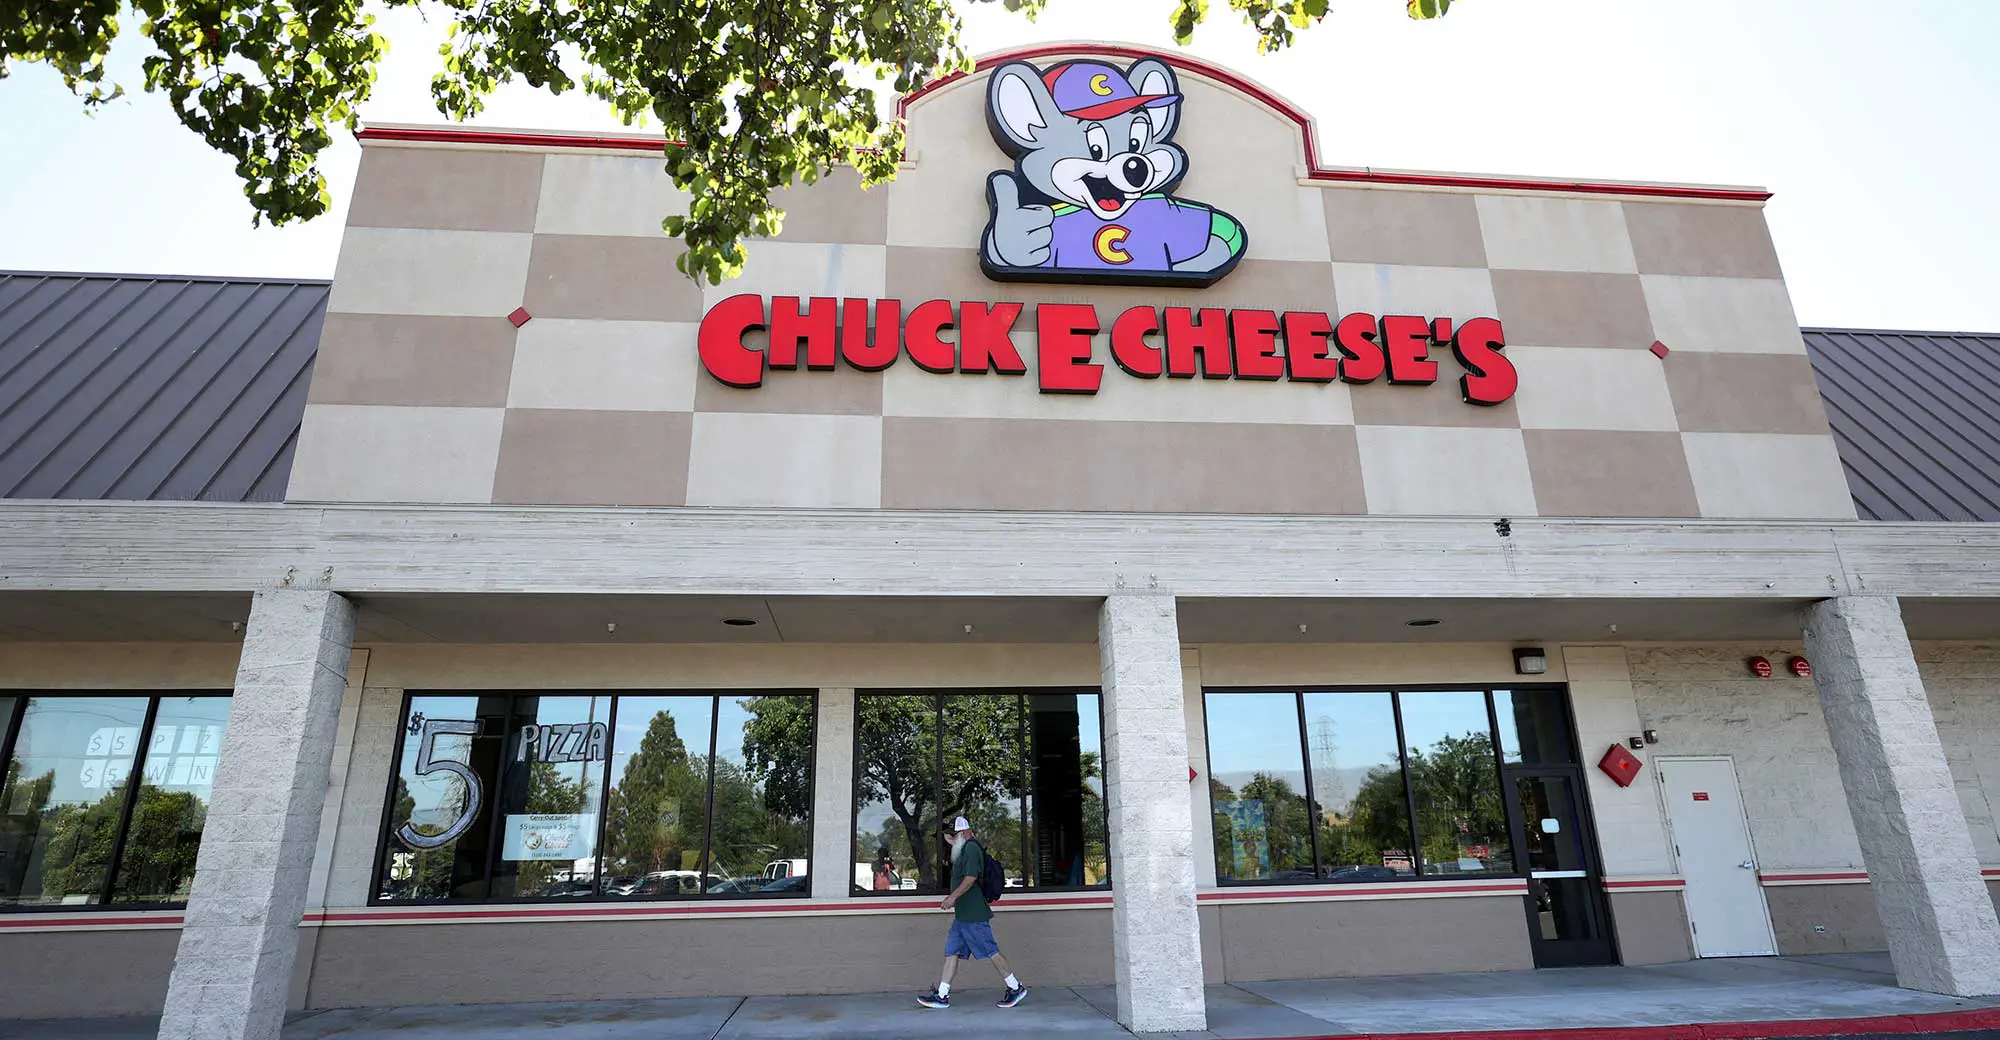 Chuck E. Cheese Negotiating to Pay Reduced Rent